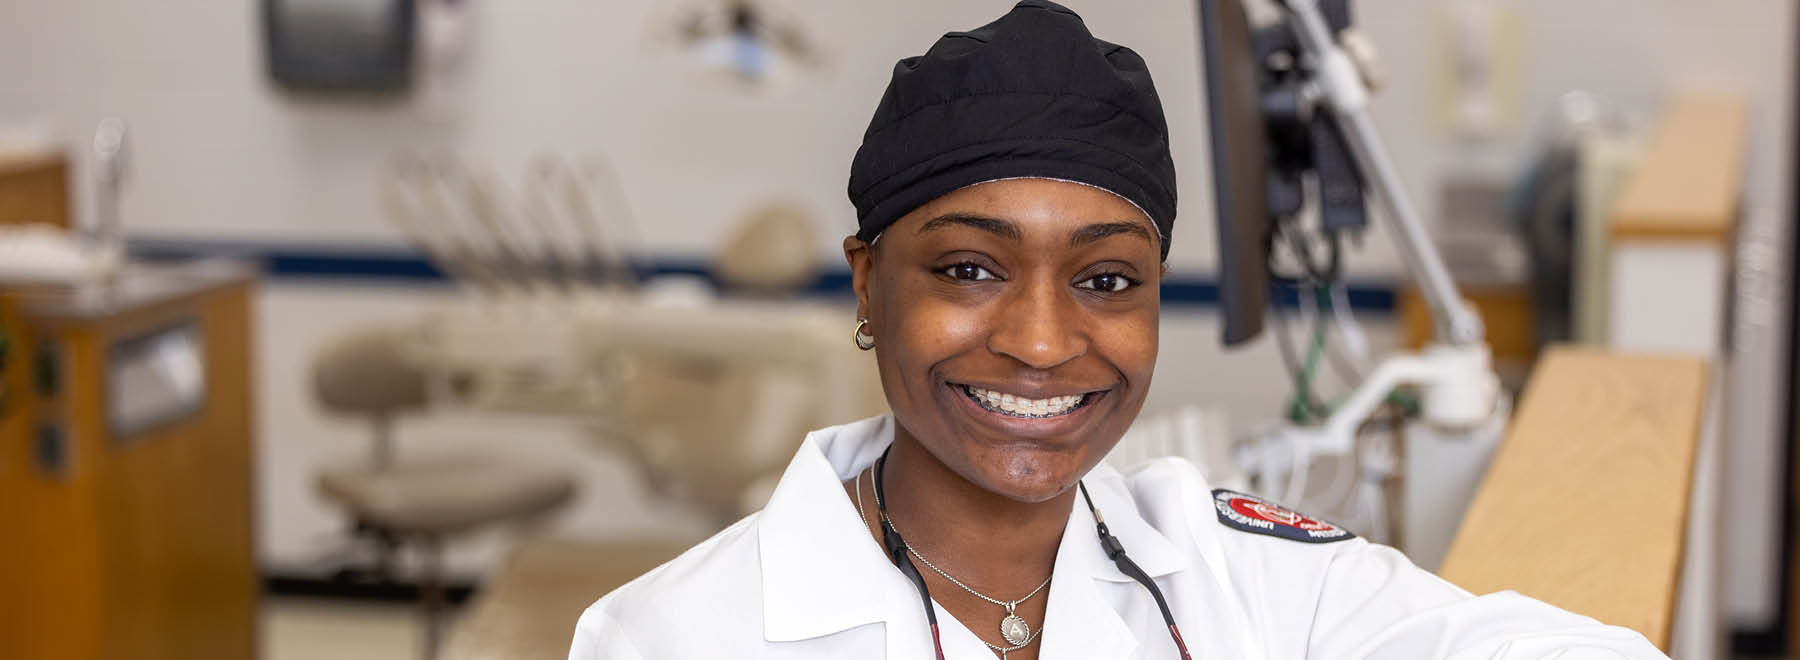 A smiling young woman in a UMMC lab coat poses in a dental office setting.